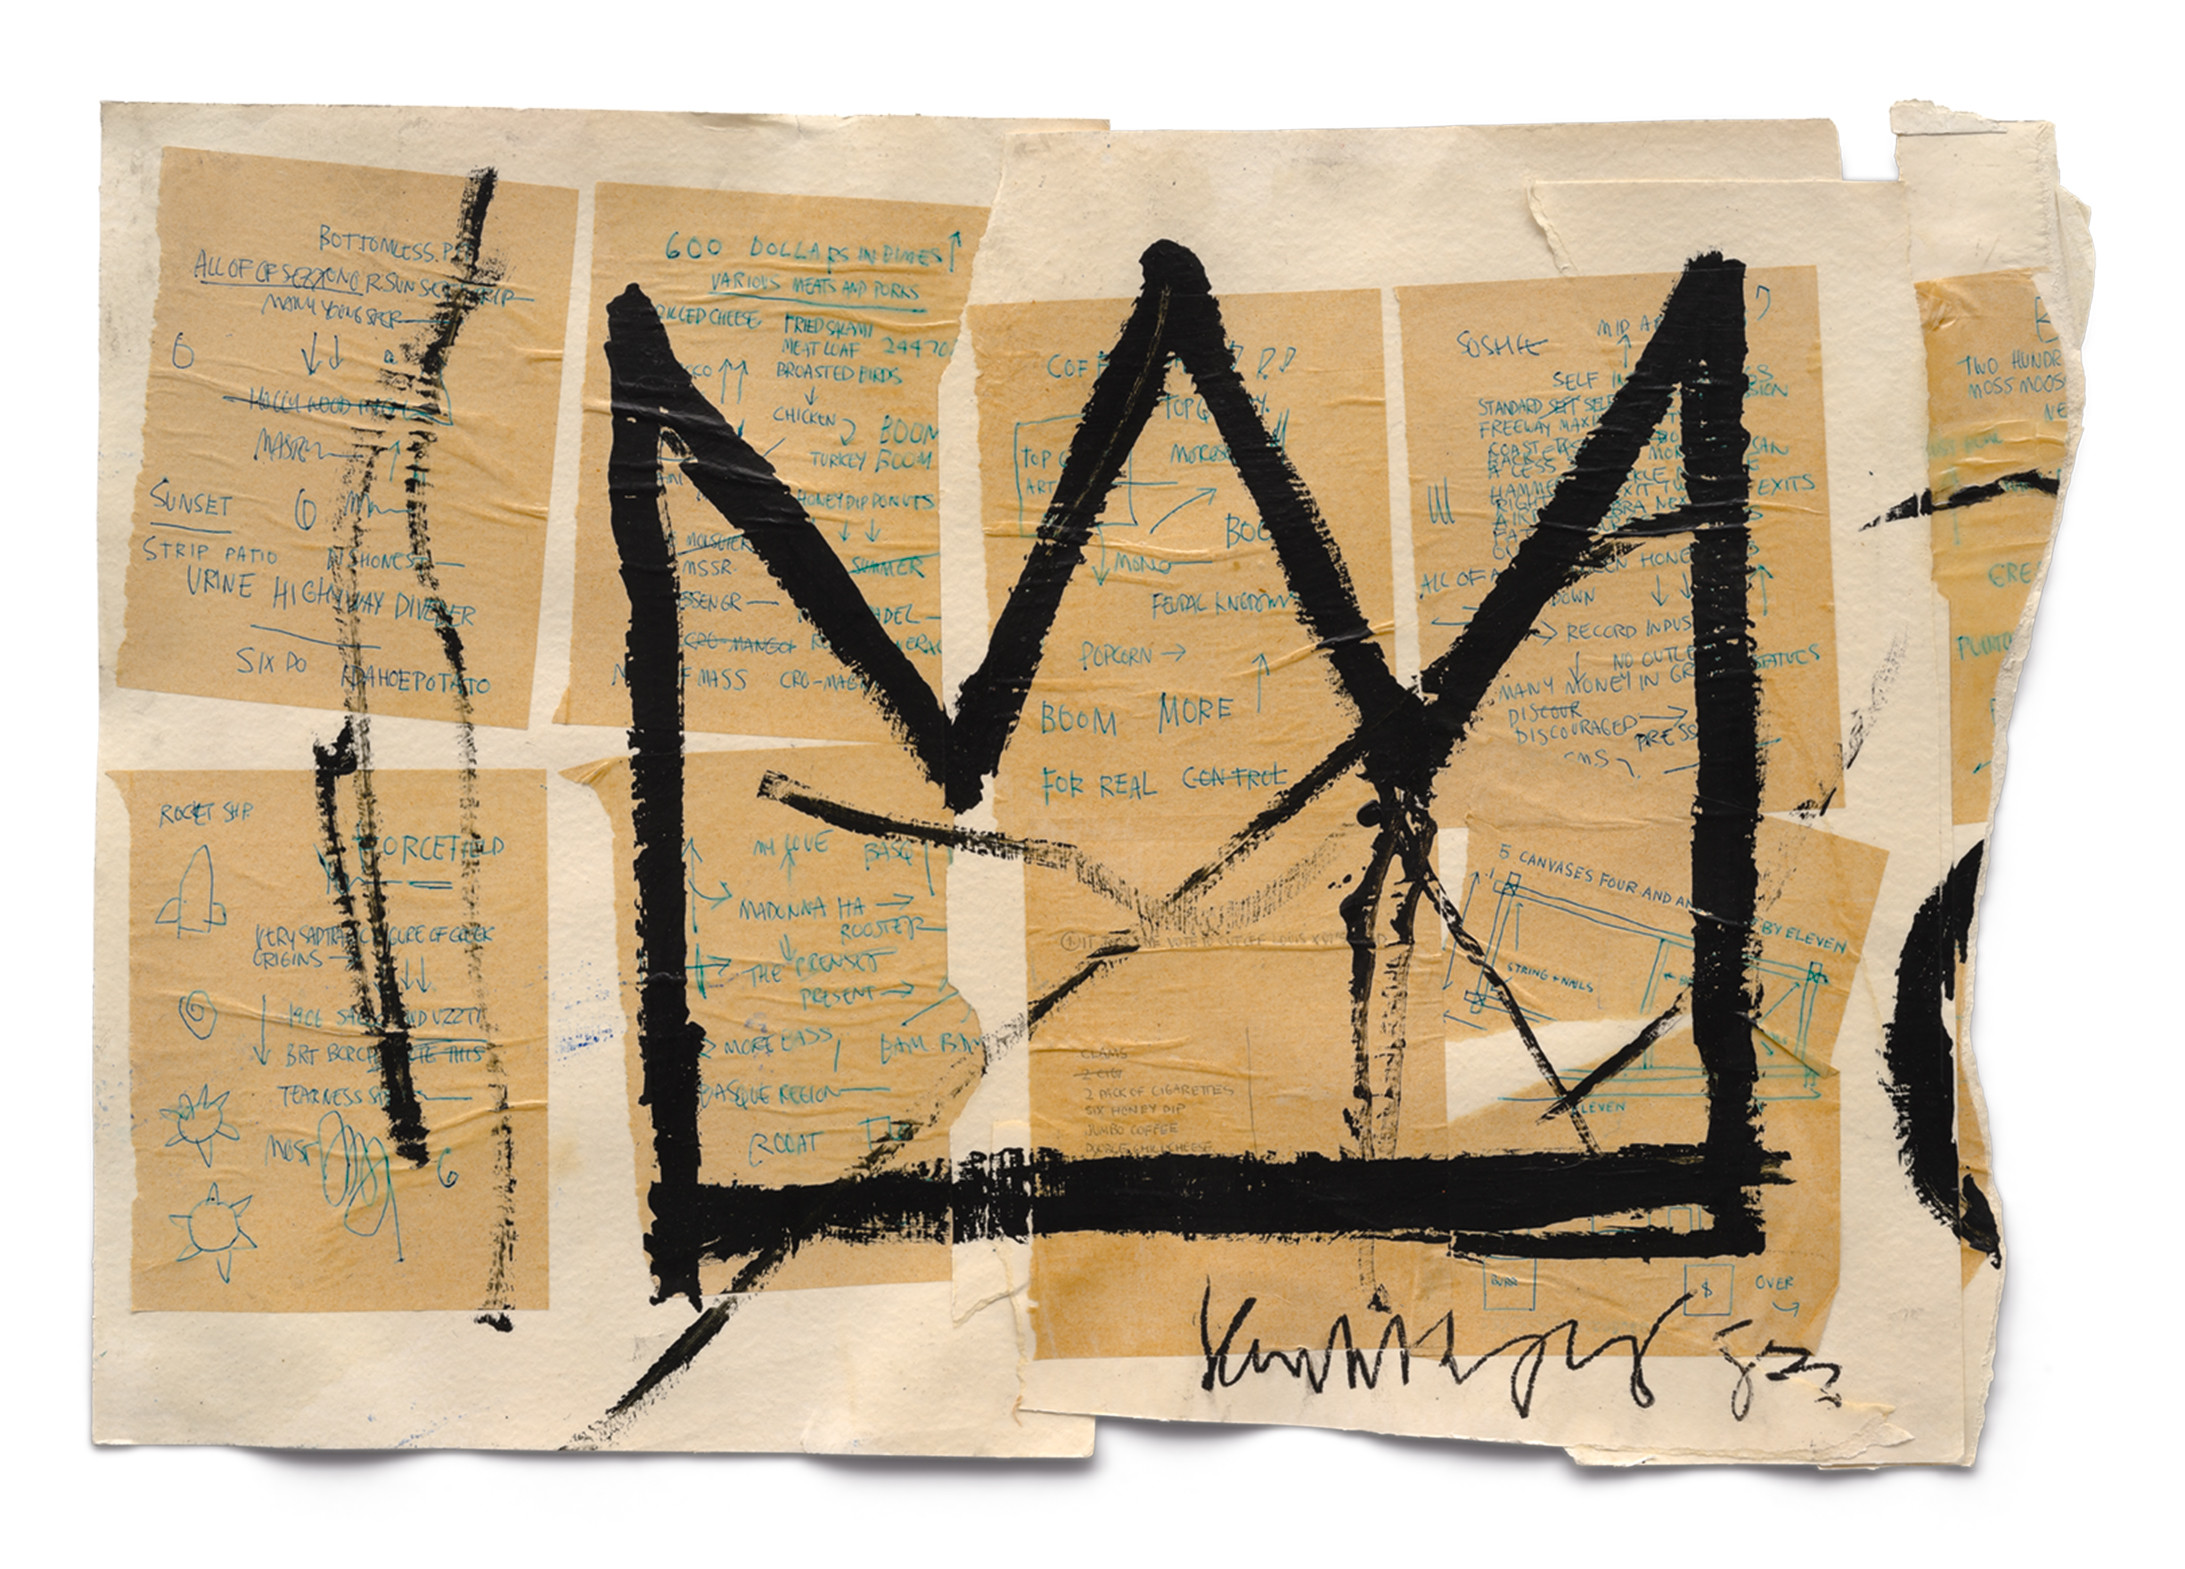 Jean-Michel Basquiat, Untitled (Crown), 1982, Acrylic, ink and paper collage on paper, Private collection, © VG Bild-Kunst Bonn, 2018 & The Estate of Jean-Michel Basquiat. Licensed by Artestar, New York